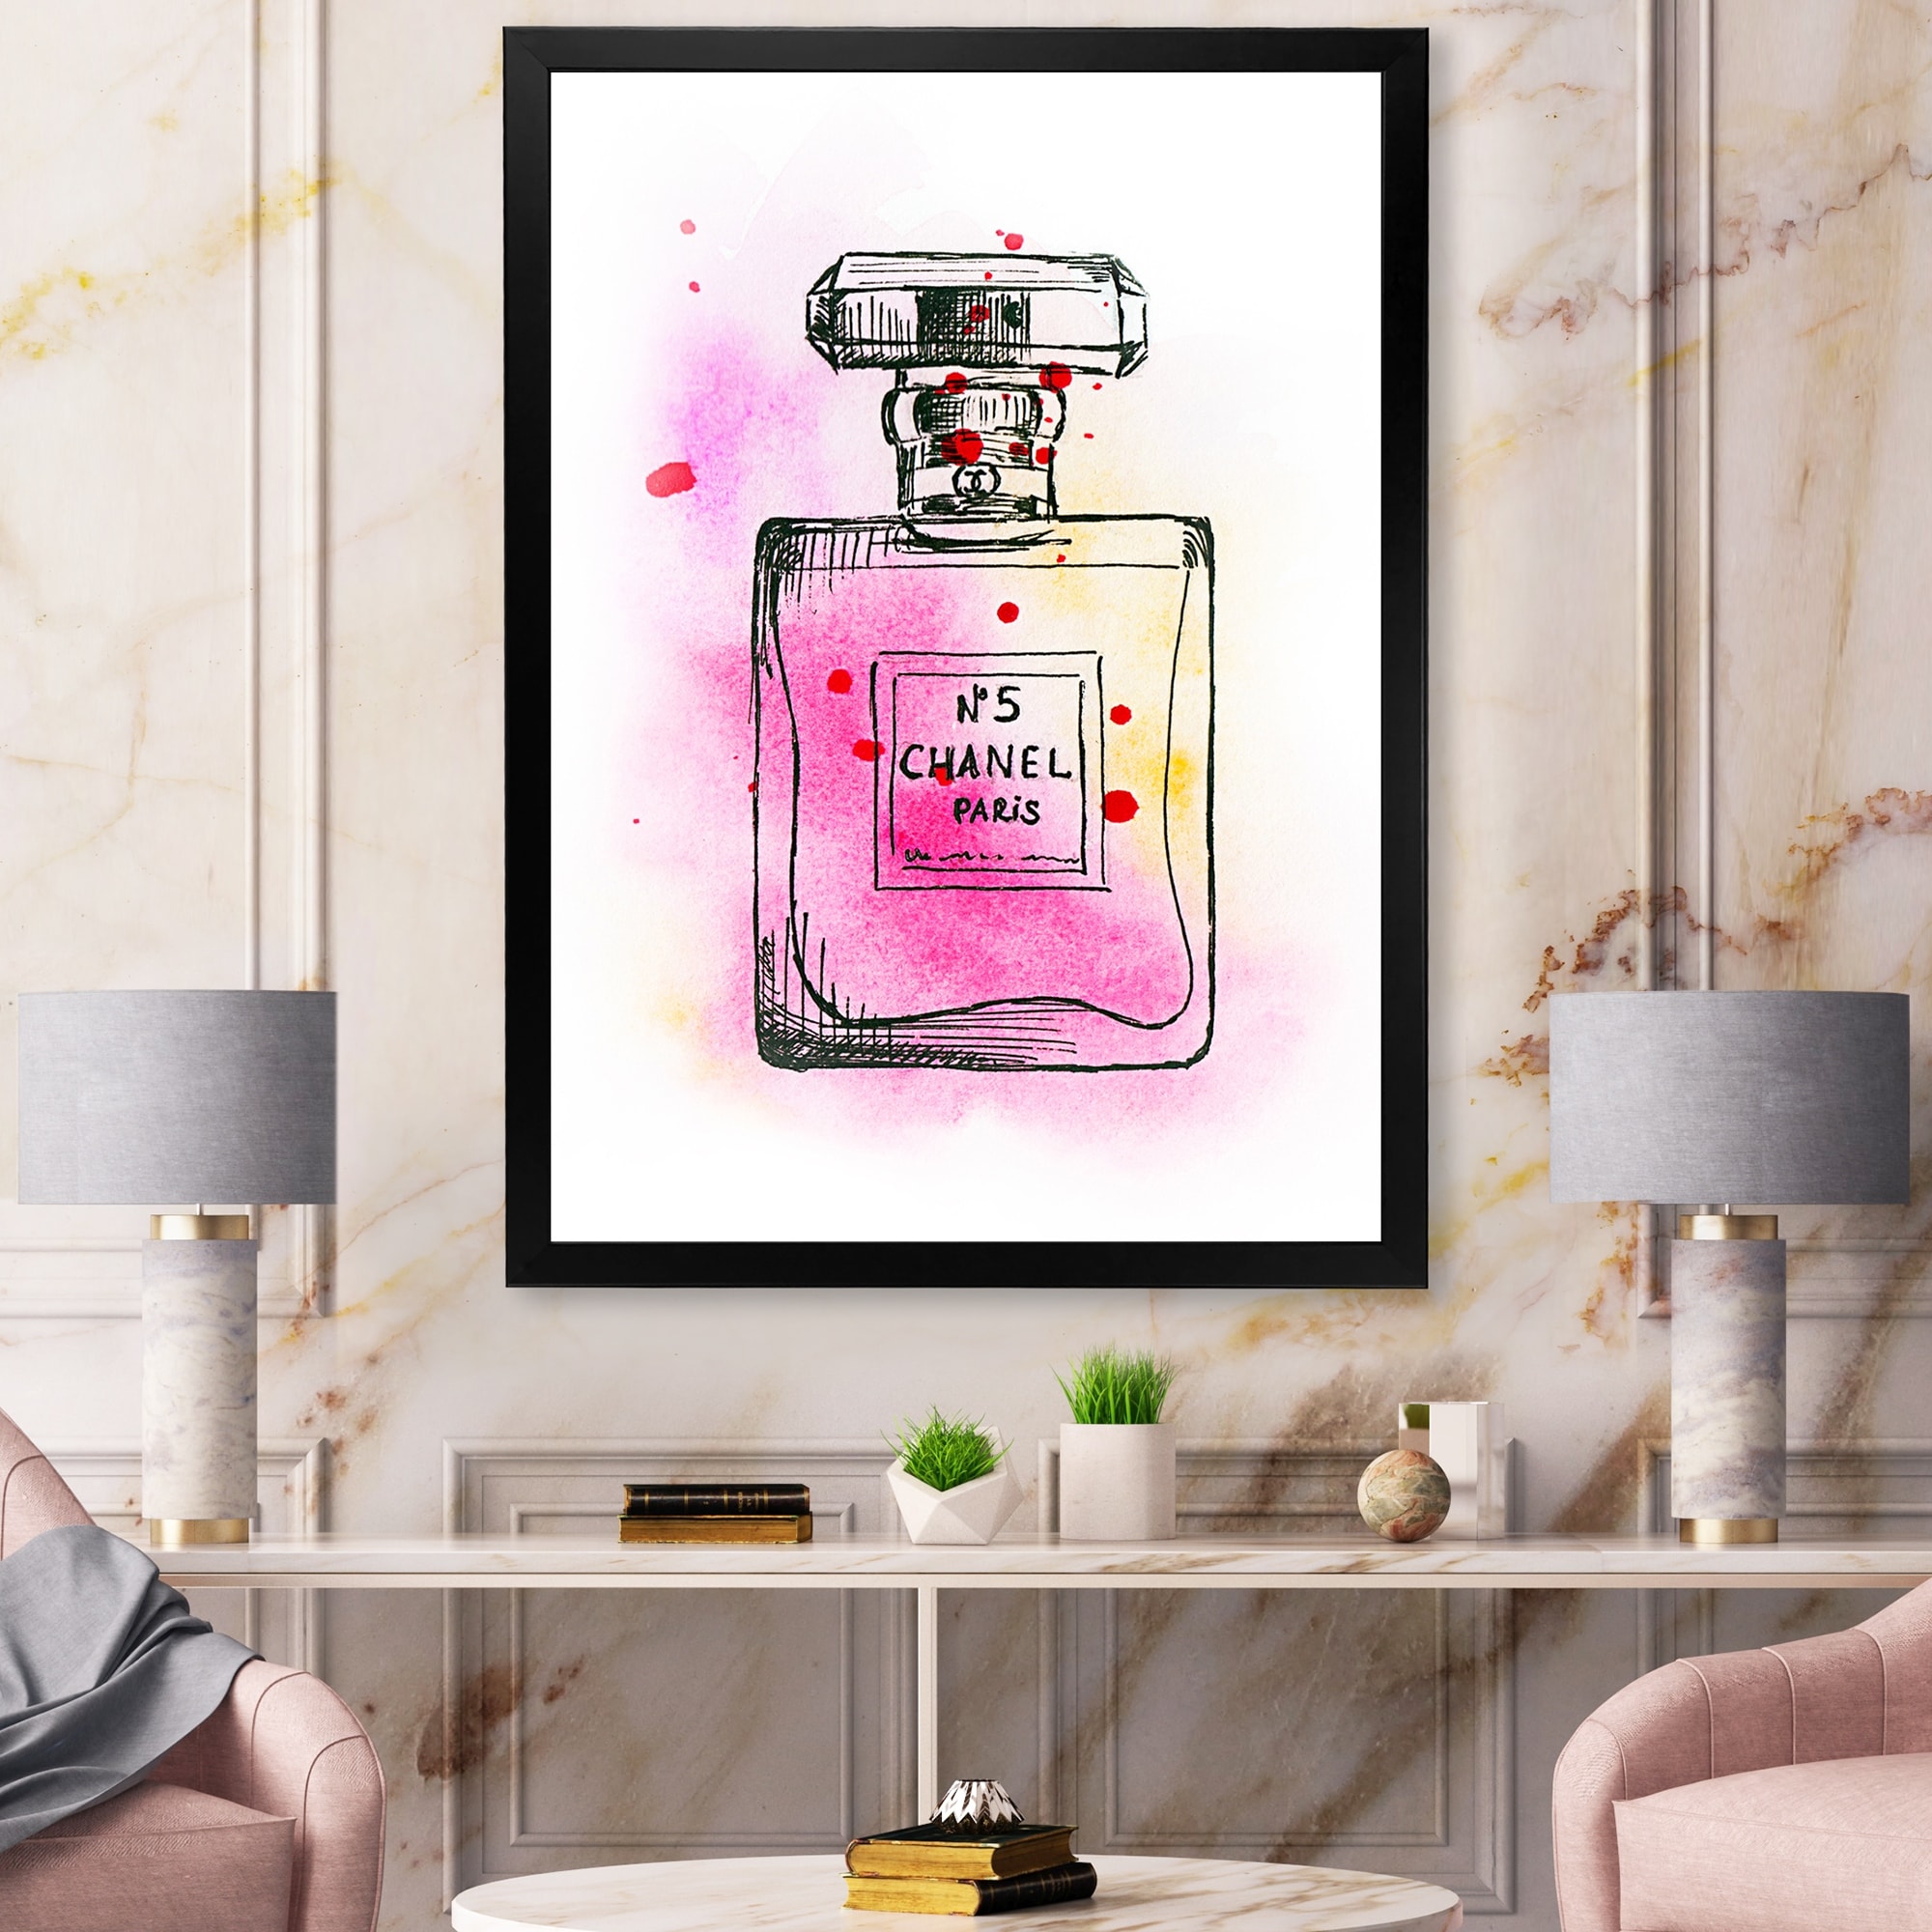 Designart Perfume Chanel Five IV French Country Framed Art Print - Bed  Bath & Beyond - 35863984